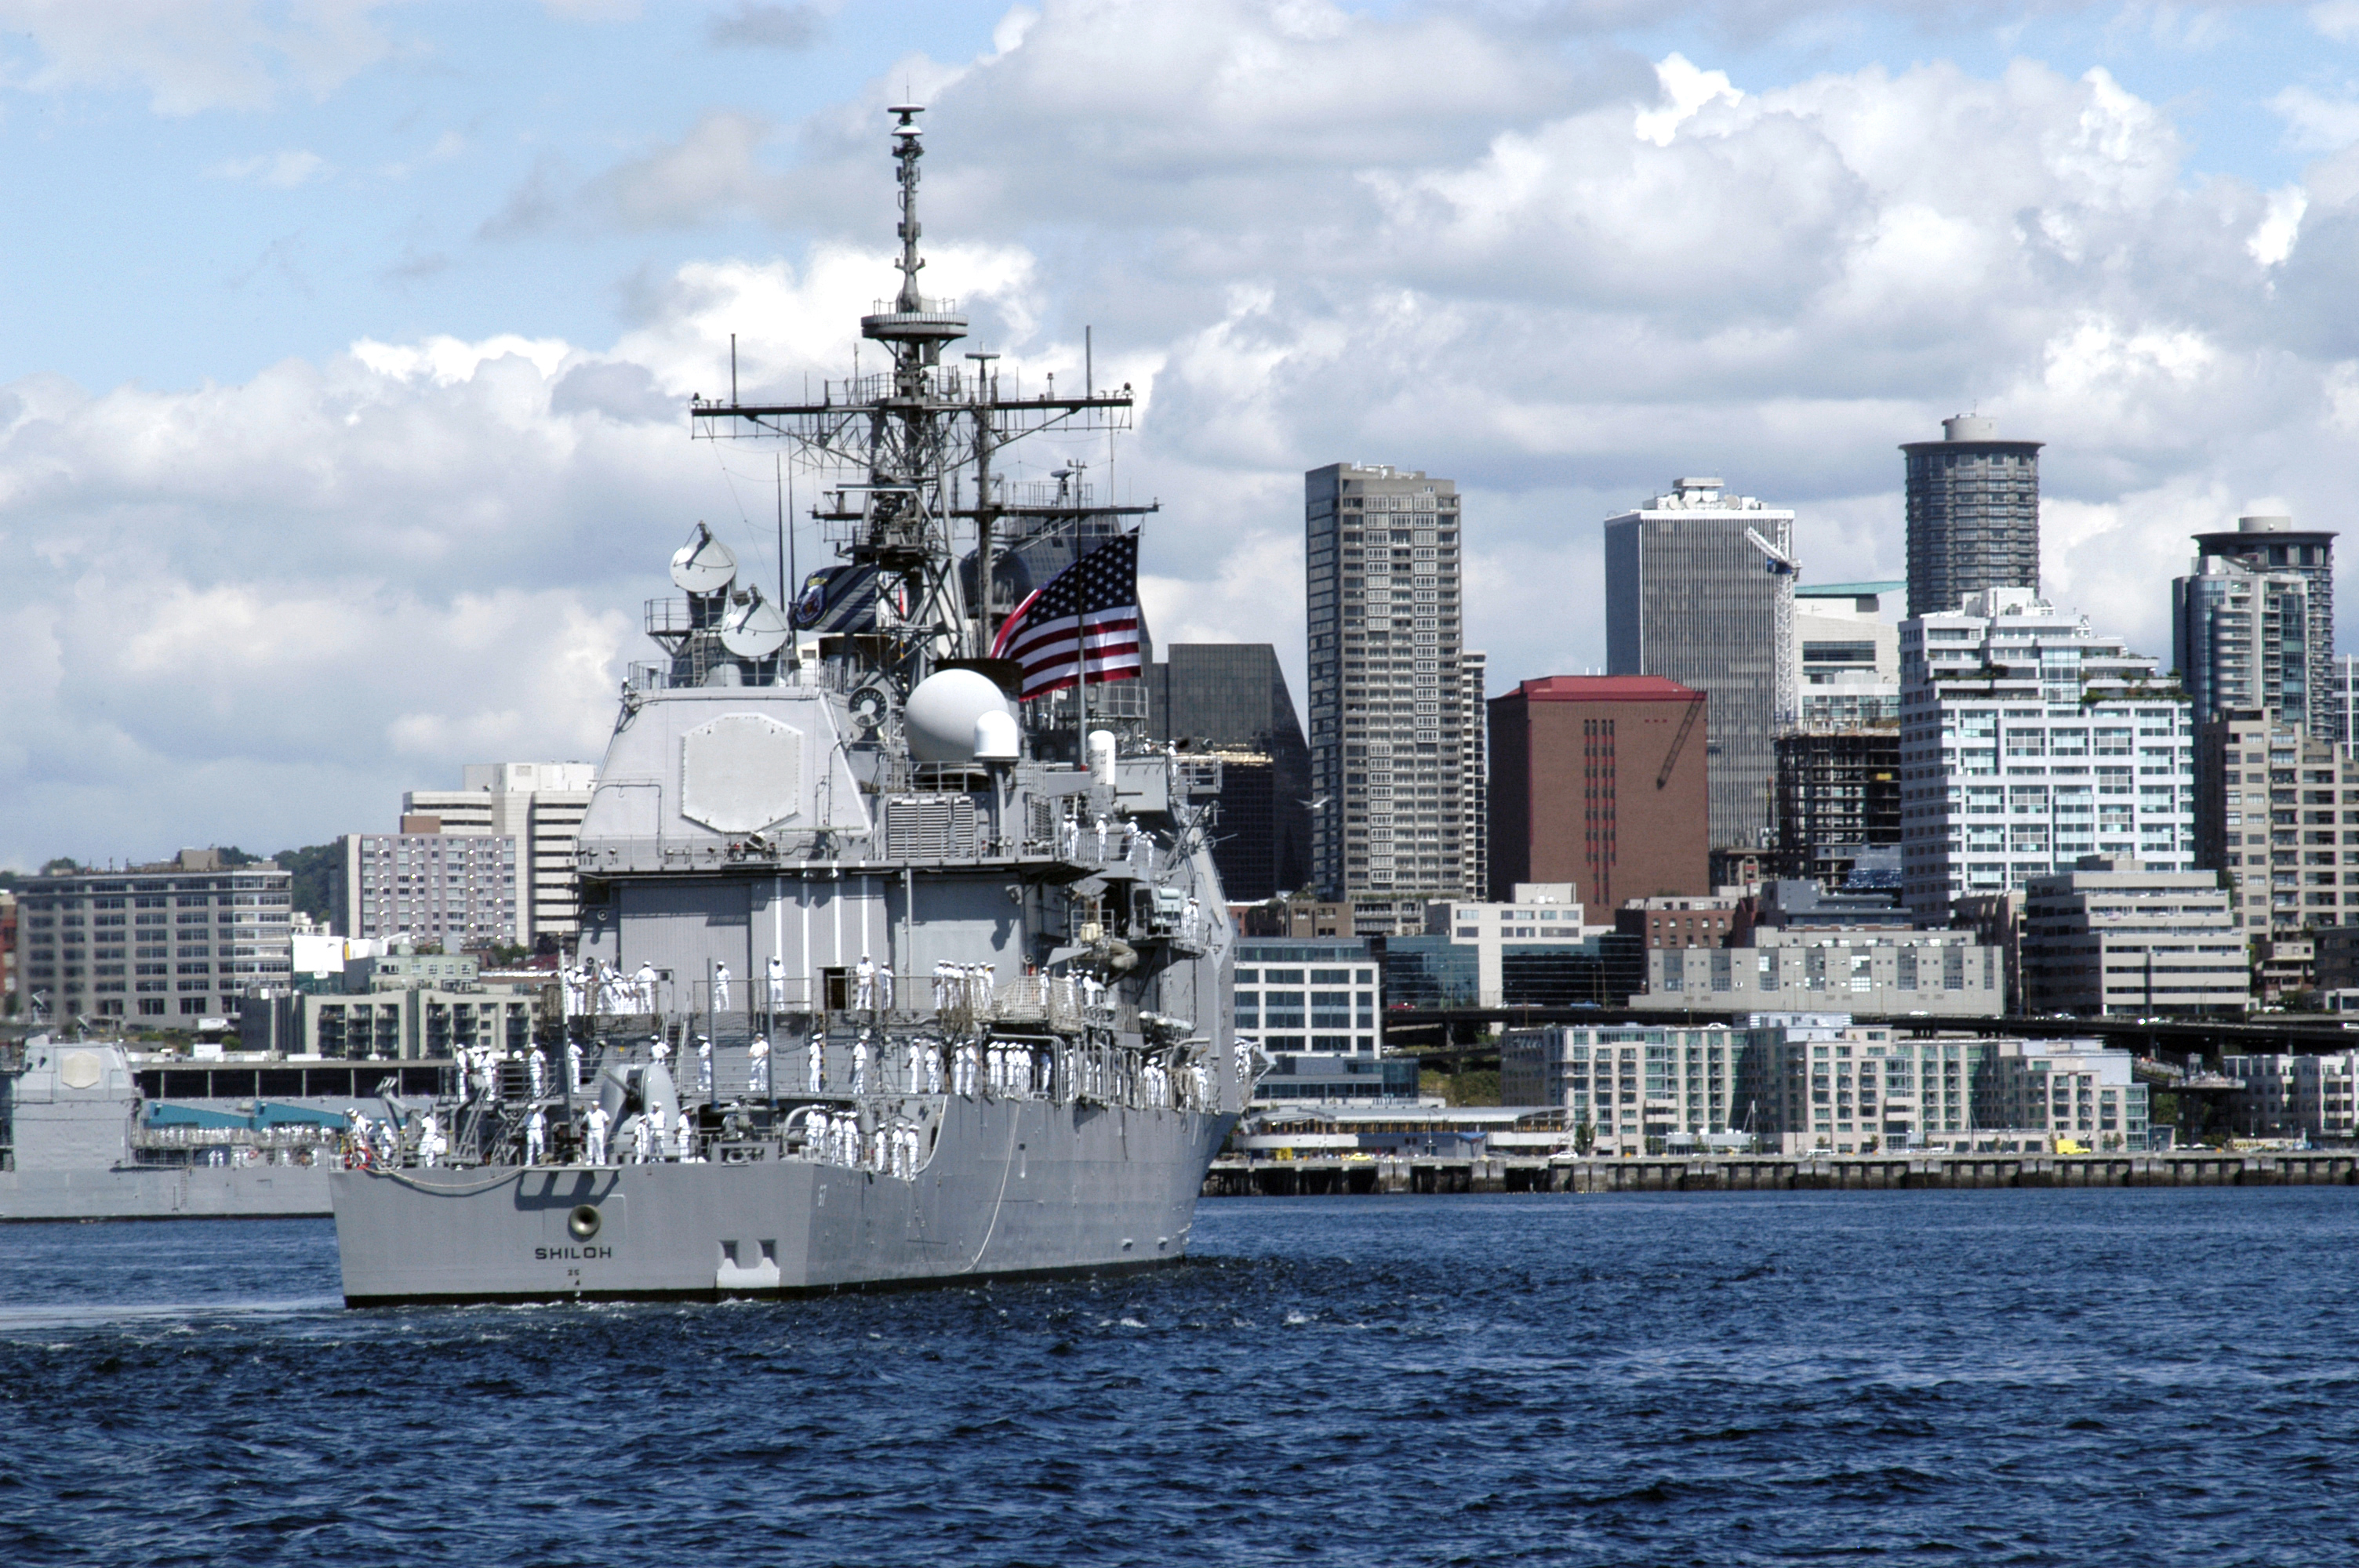 US Navy 040805-N-0683J-674 The guided missile cruiser USS Shiloh (CG 67) enters Seattle during the parade of ships, a part of Seattle's traditional summer festival, the Seattle Seafair Fleet Week